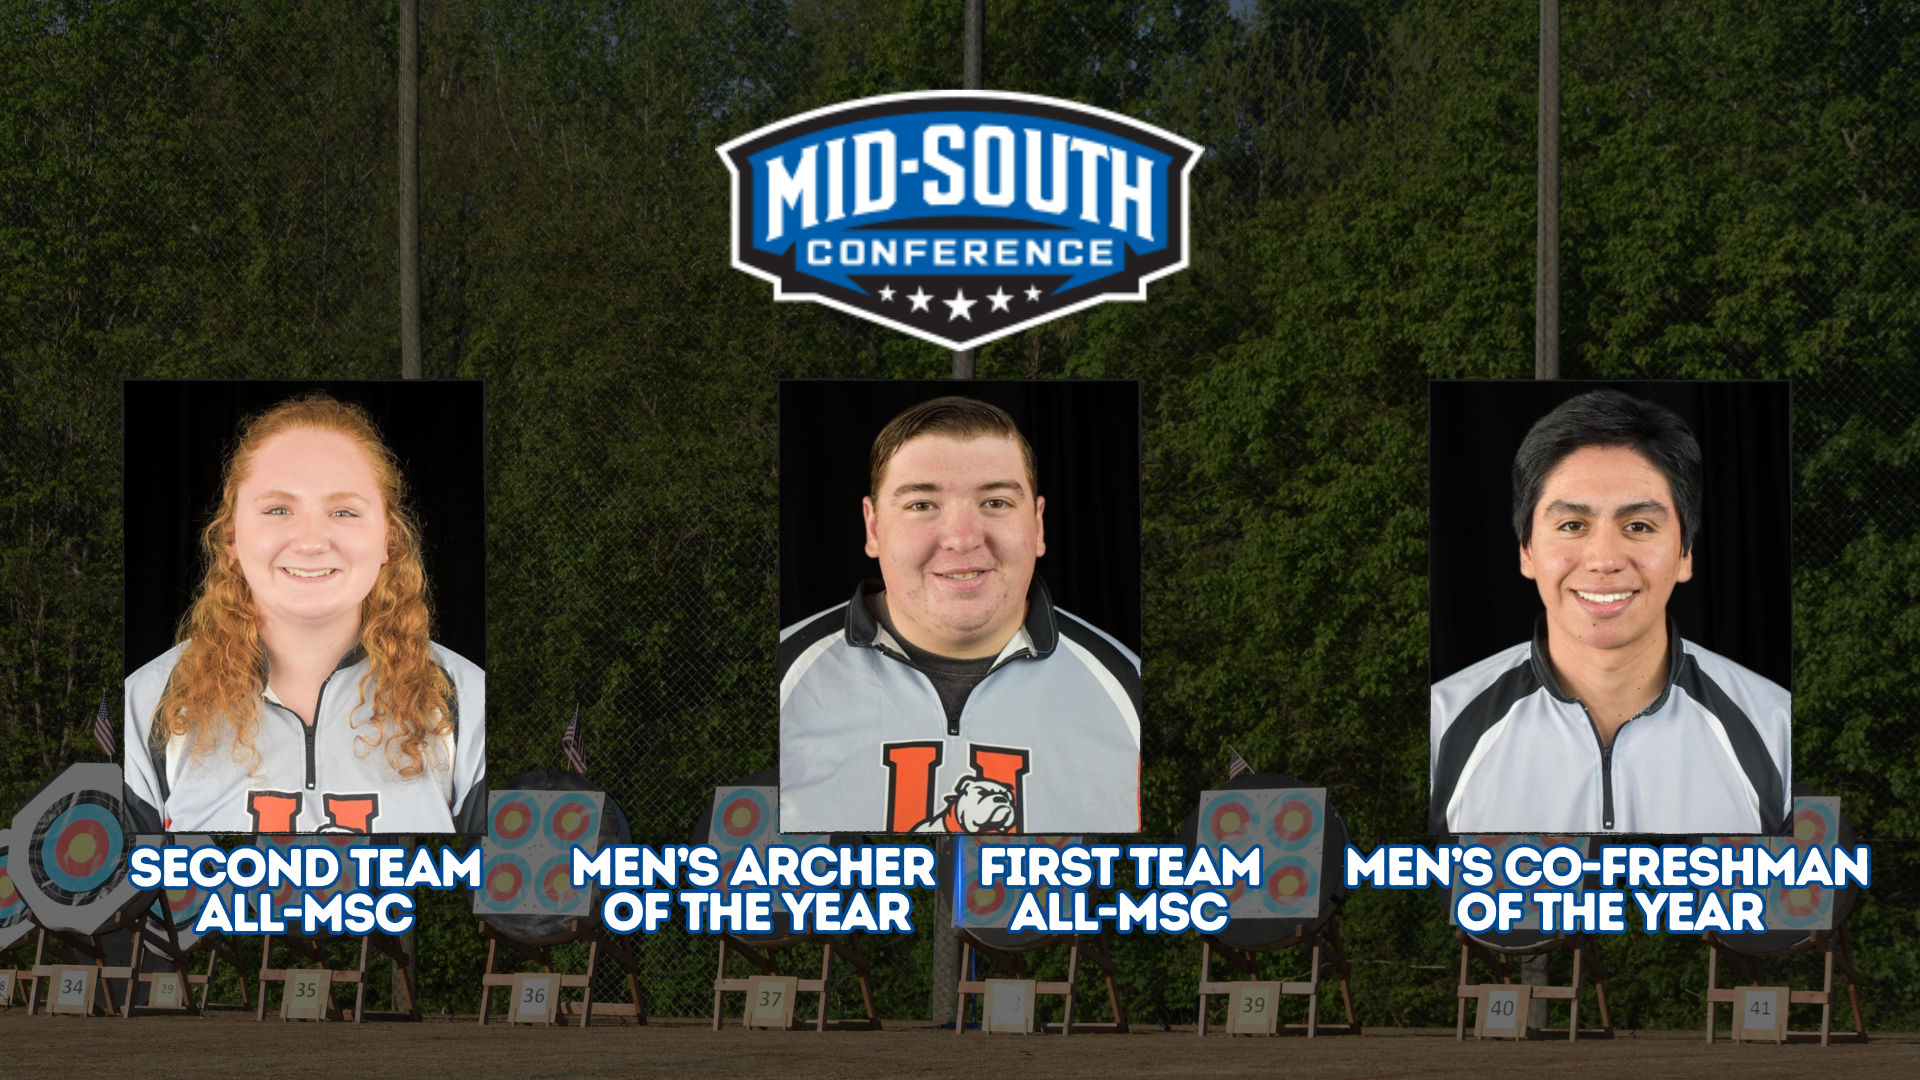 Union archery earns multiple All-MSC honors; Coffey named MSC Men’s Archer of the Year